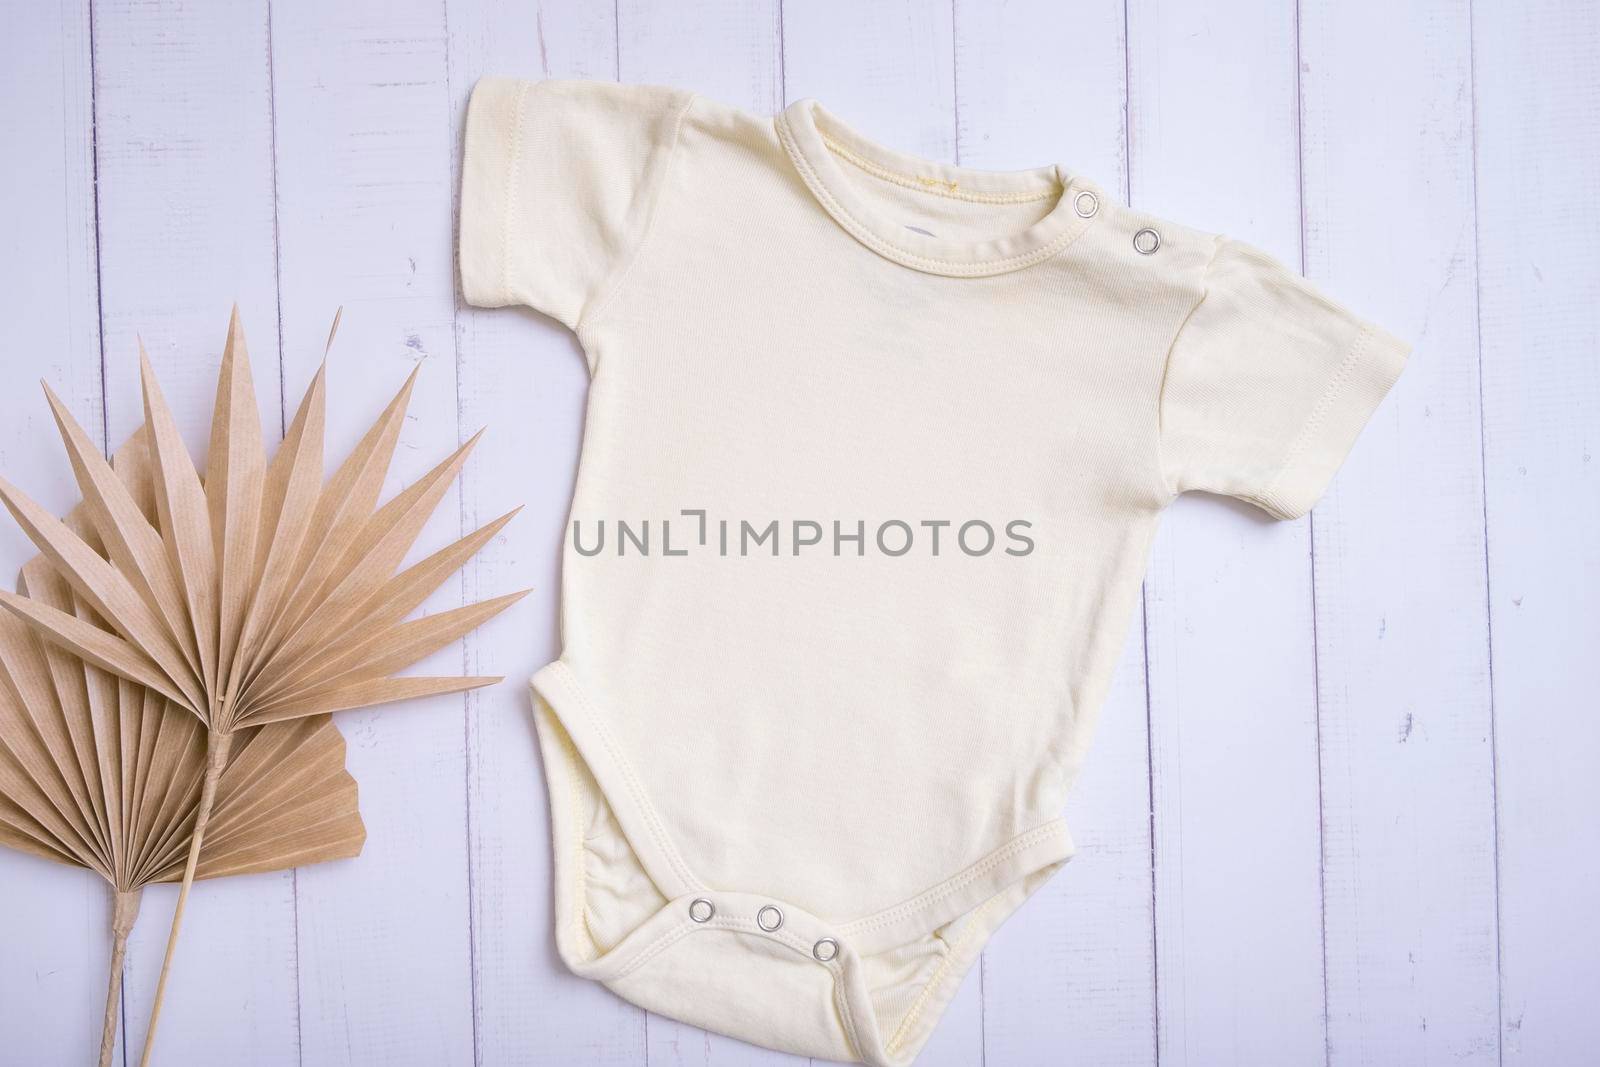 Yellow baby bodysuit mockup for logo, text or design on wooden background with palm leaves top view.